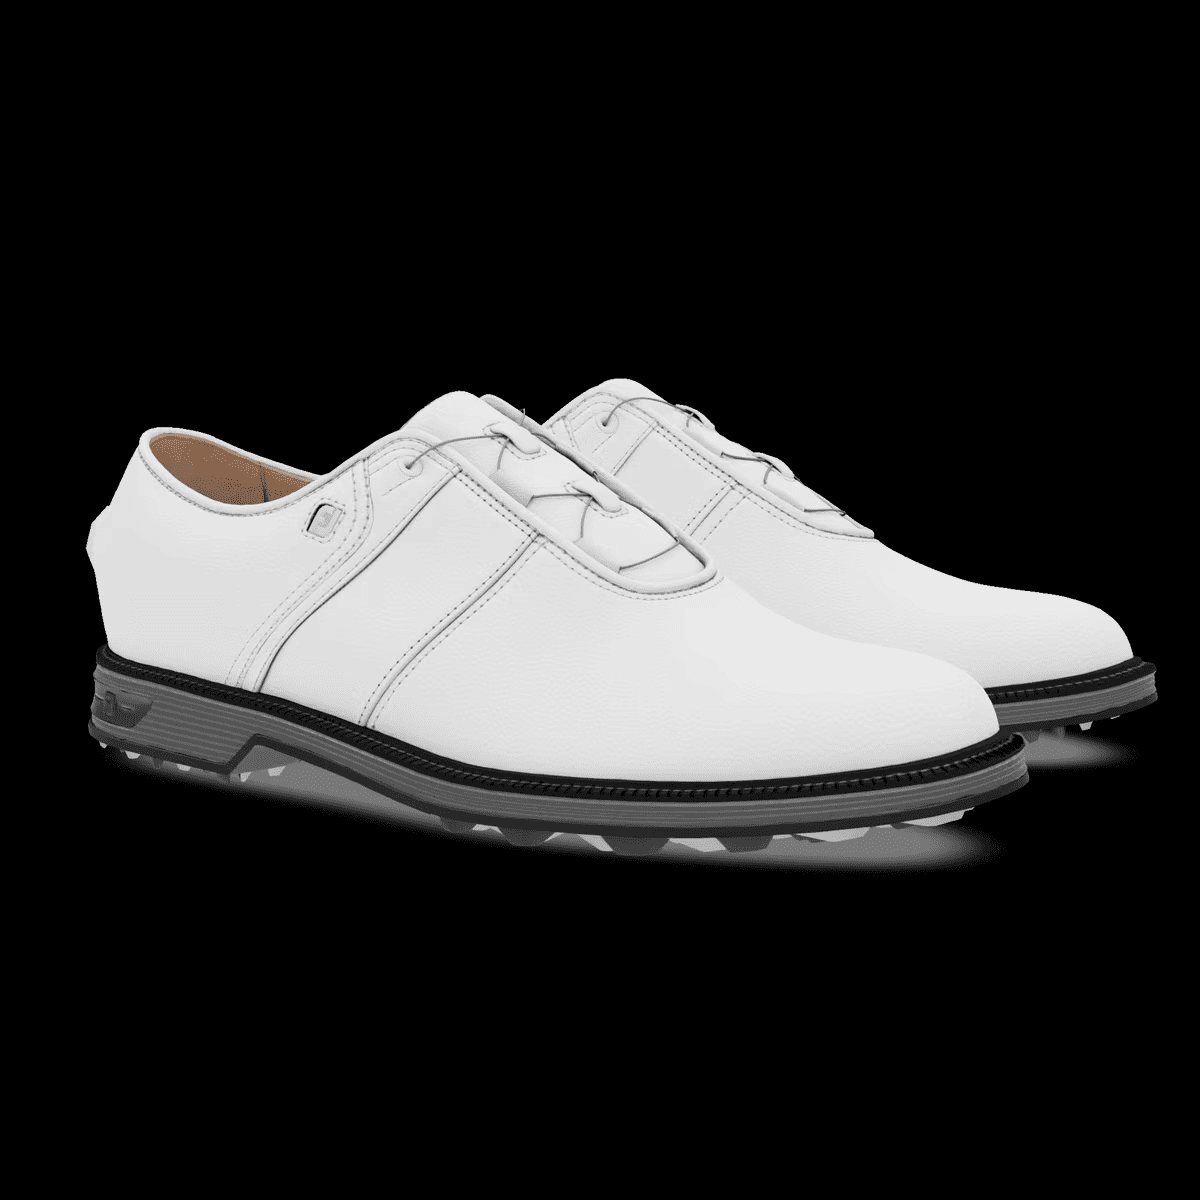 MyJoys Premiere Series Packard Spikeless BOA